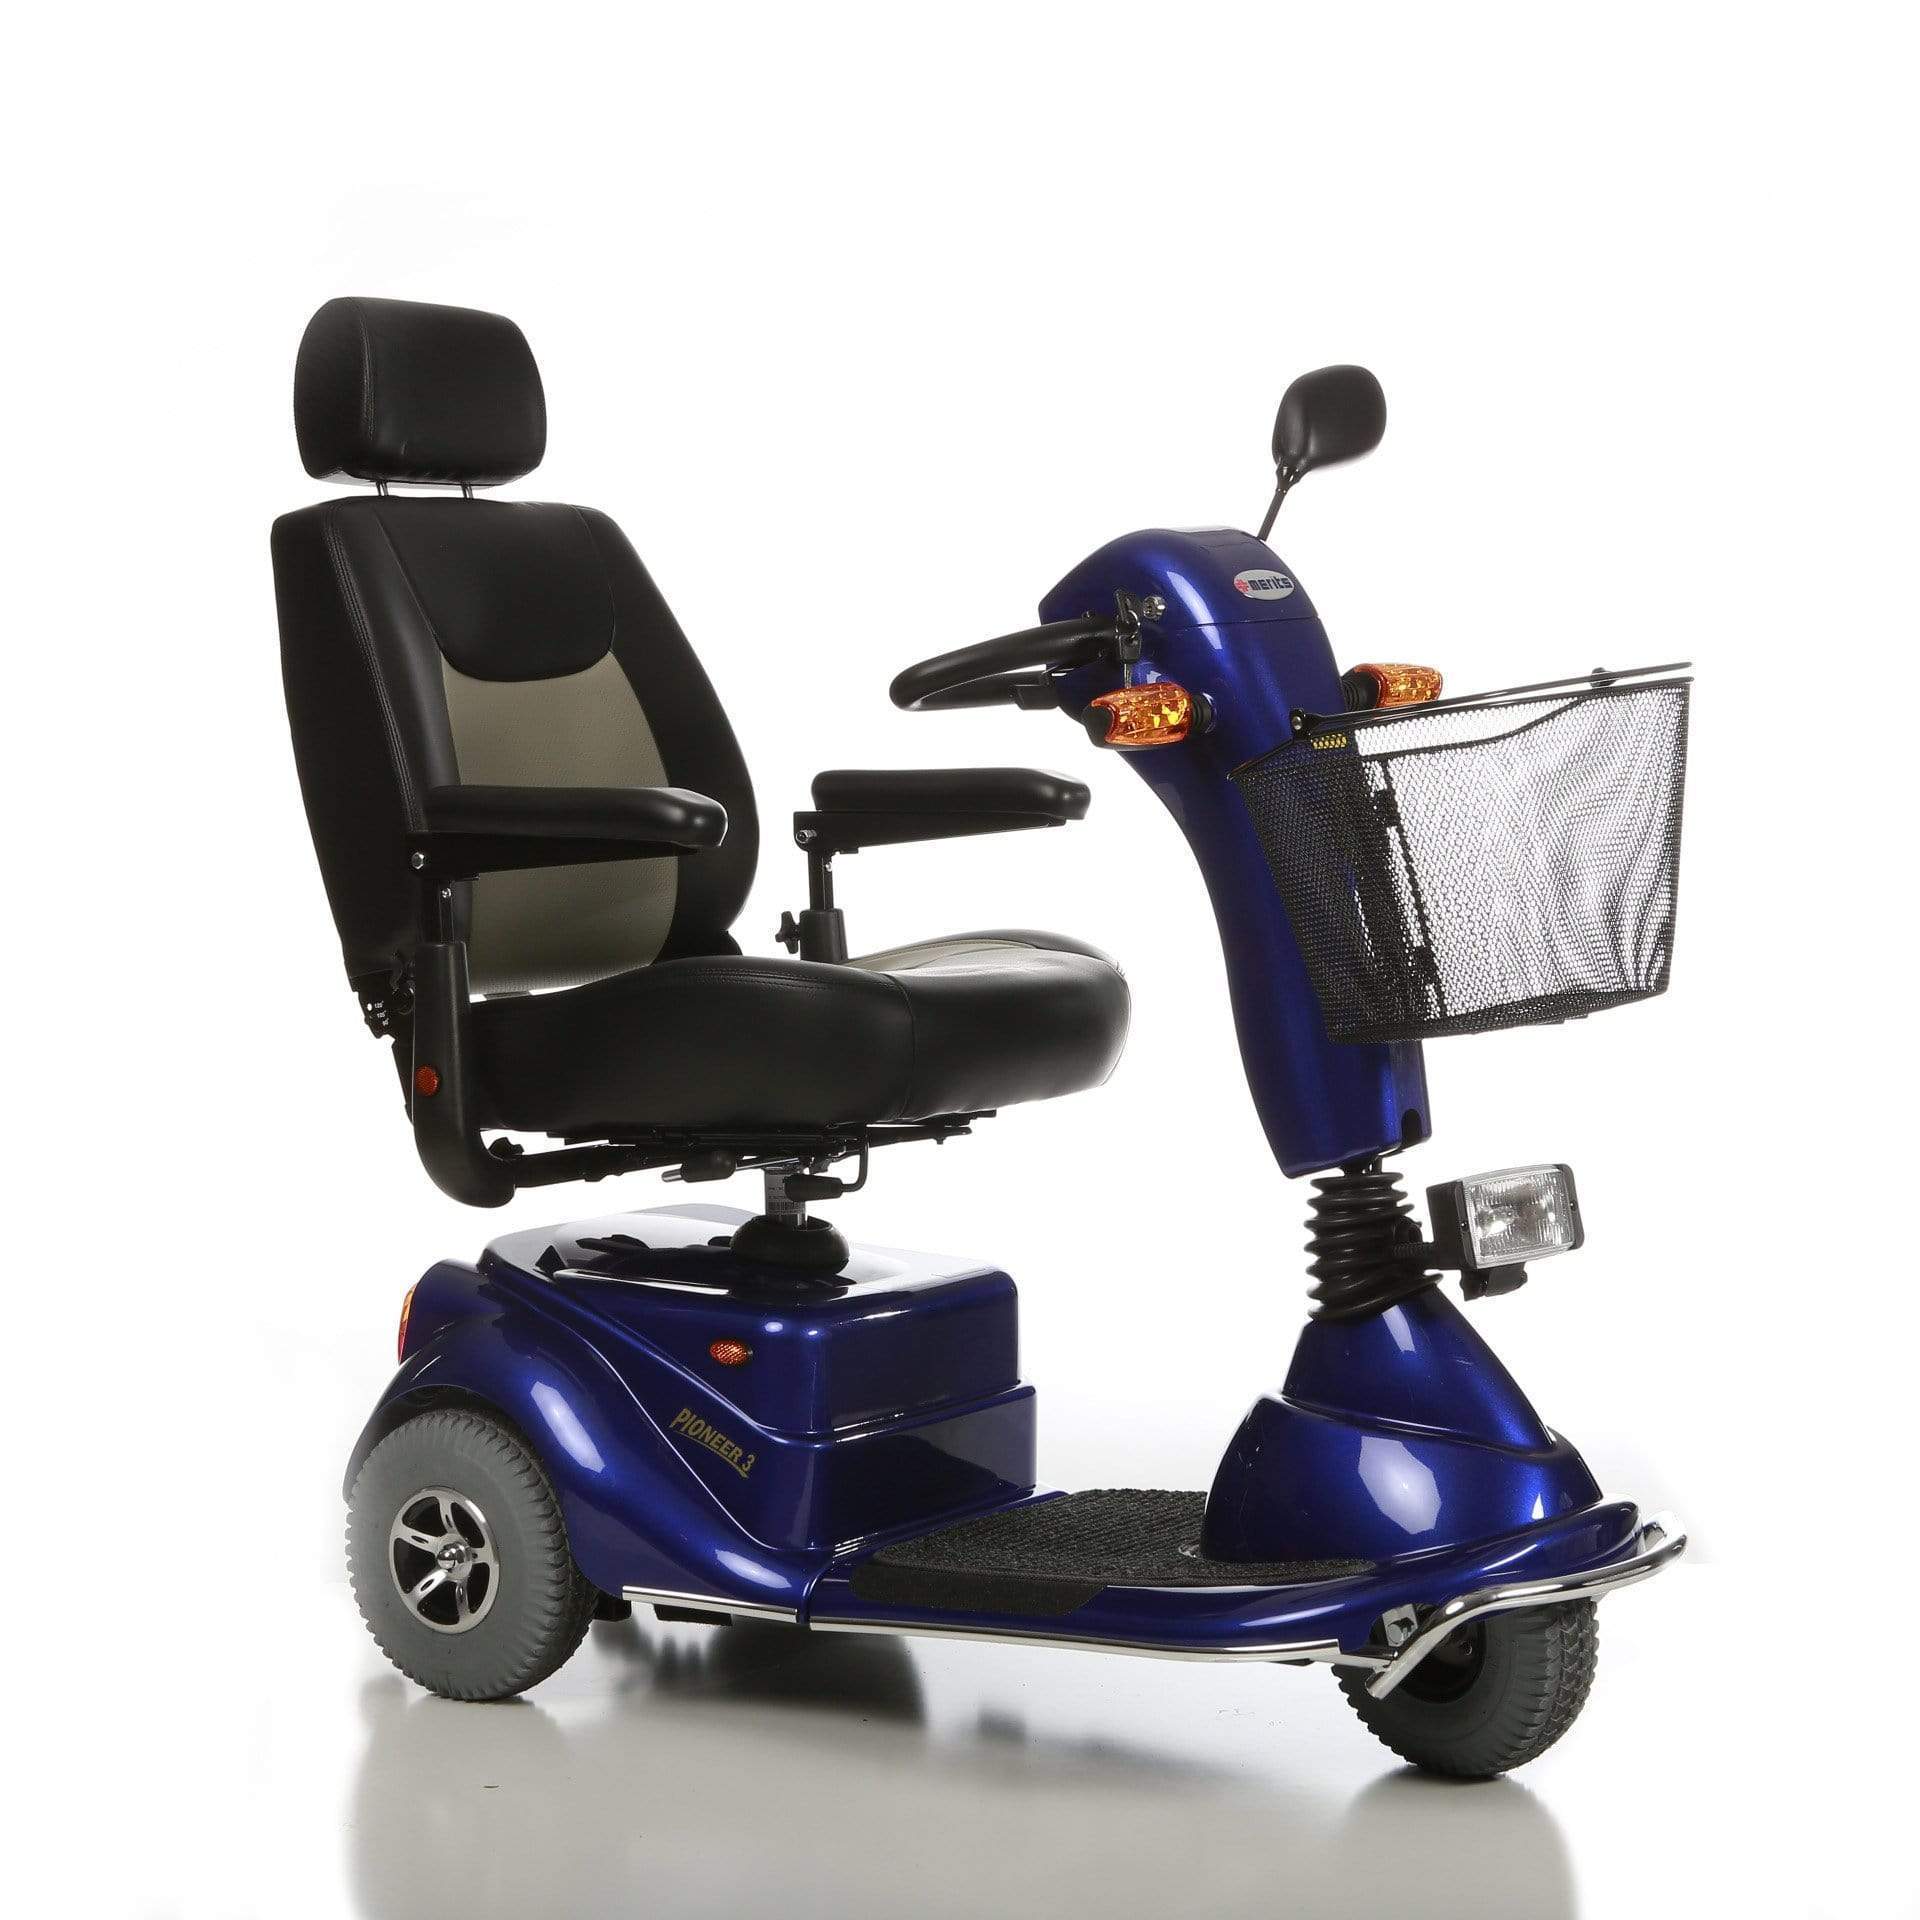 Merits Health Pioneer 3 12V/34Ah 240W 3-Wheel Mobility Scooter S131